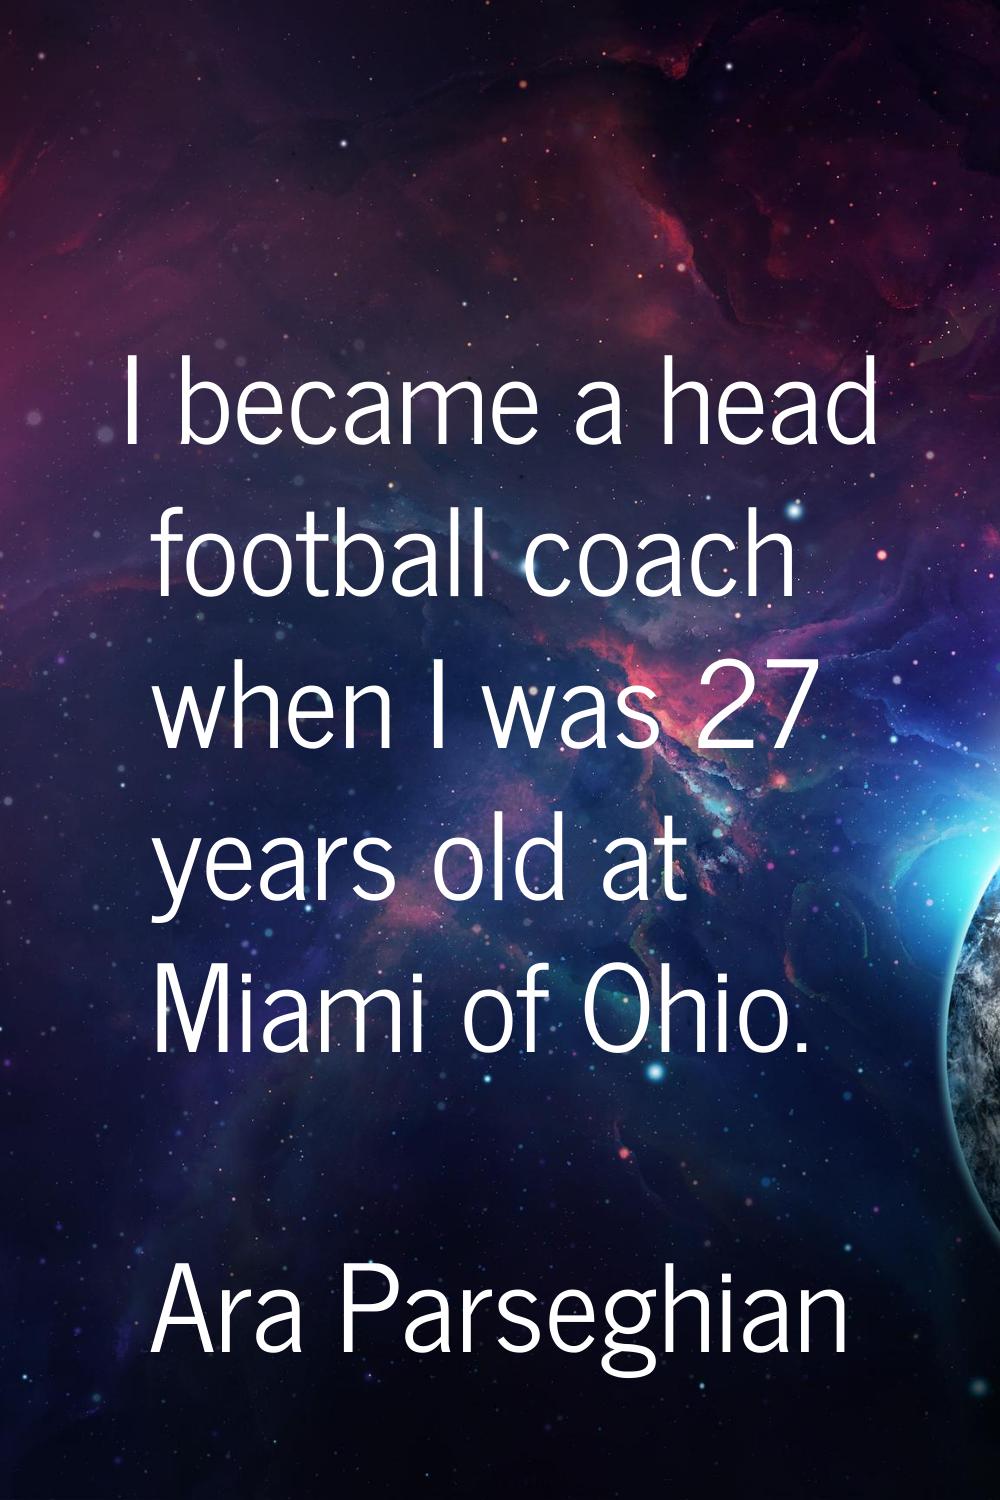 I became a head football coach when I was 27 years old at Miami of Ohio.